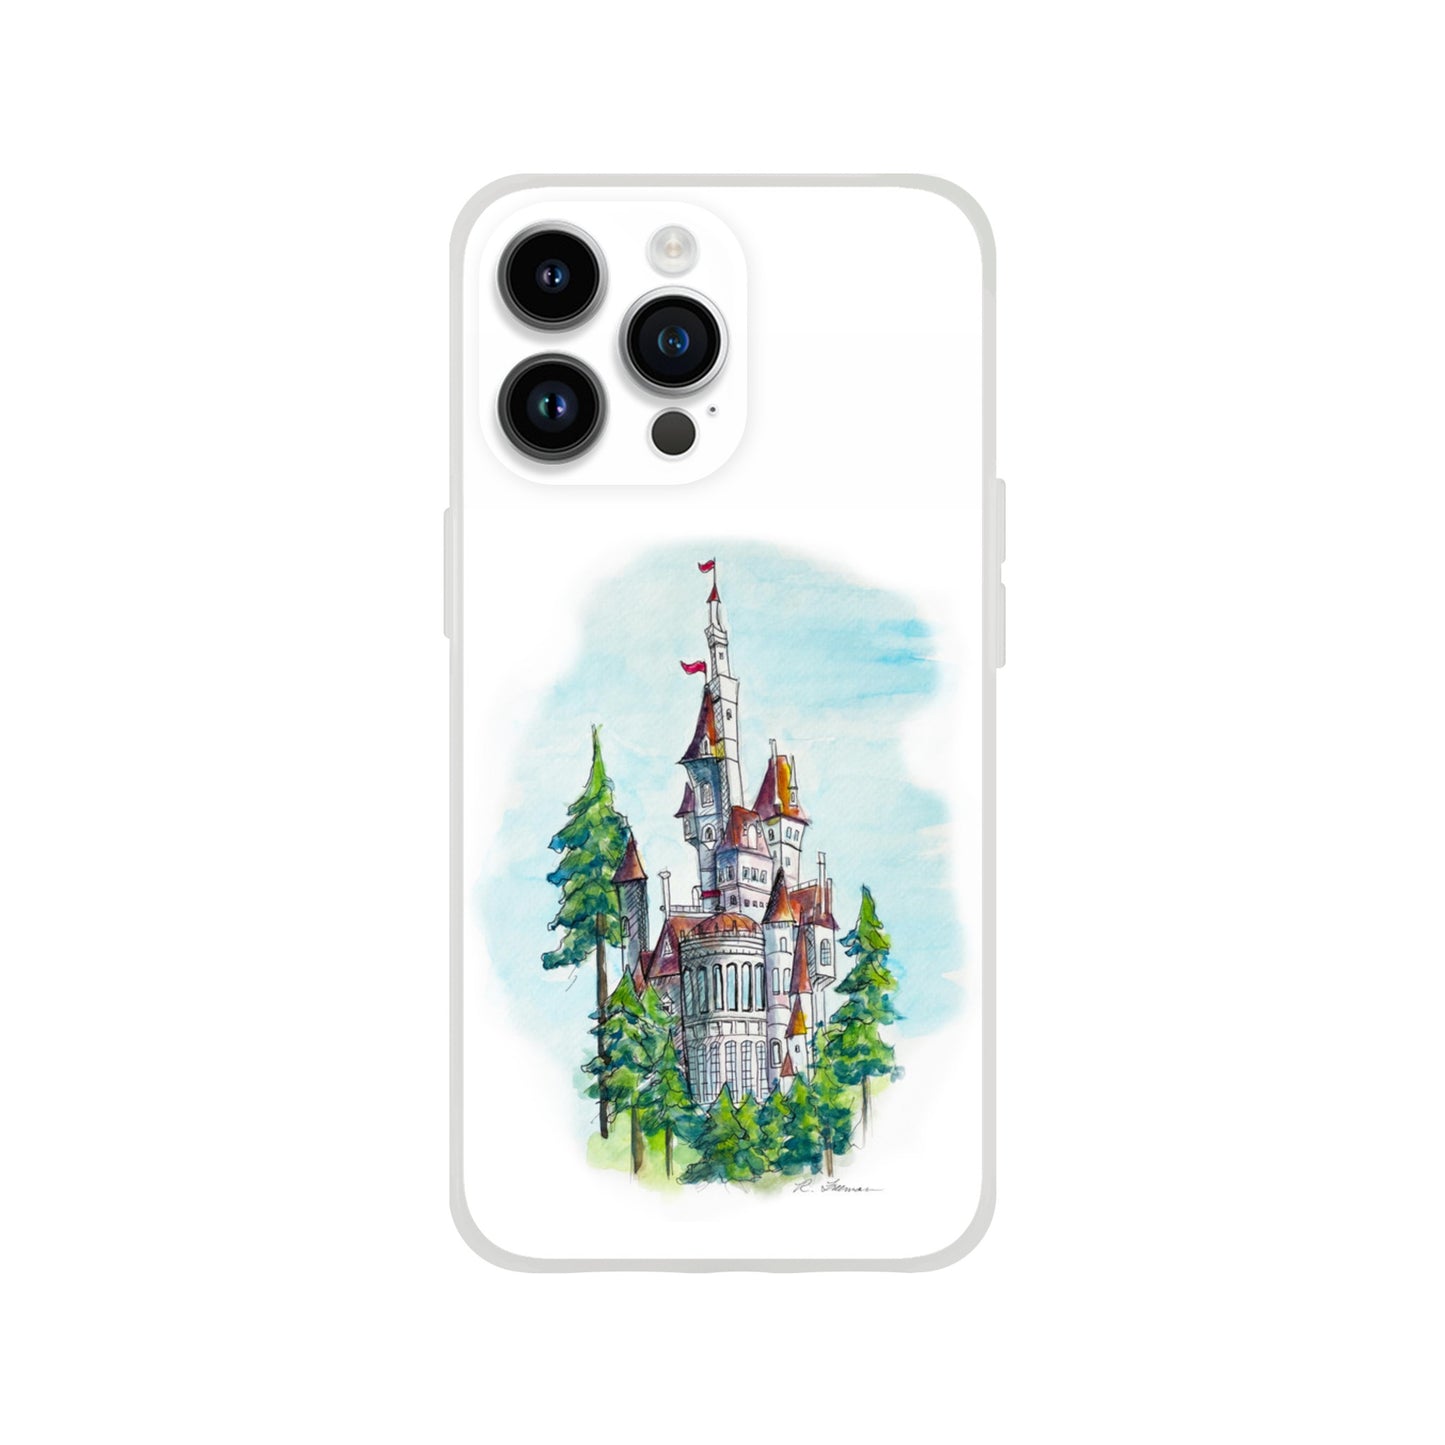 Beauty and The Beast's Castle - Flexi case